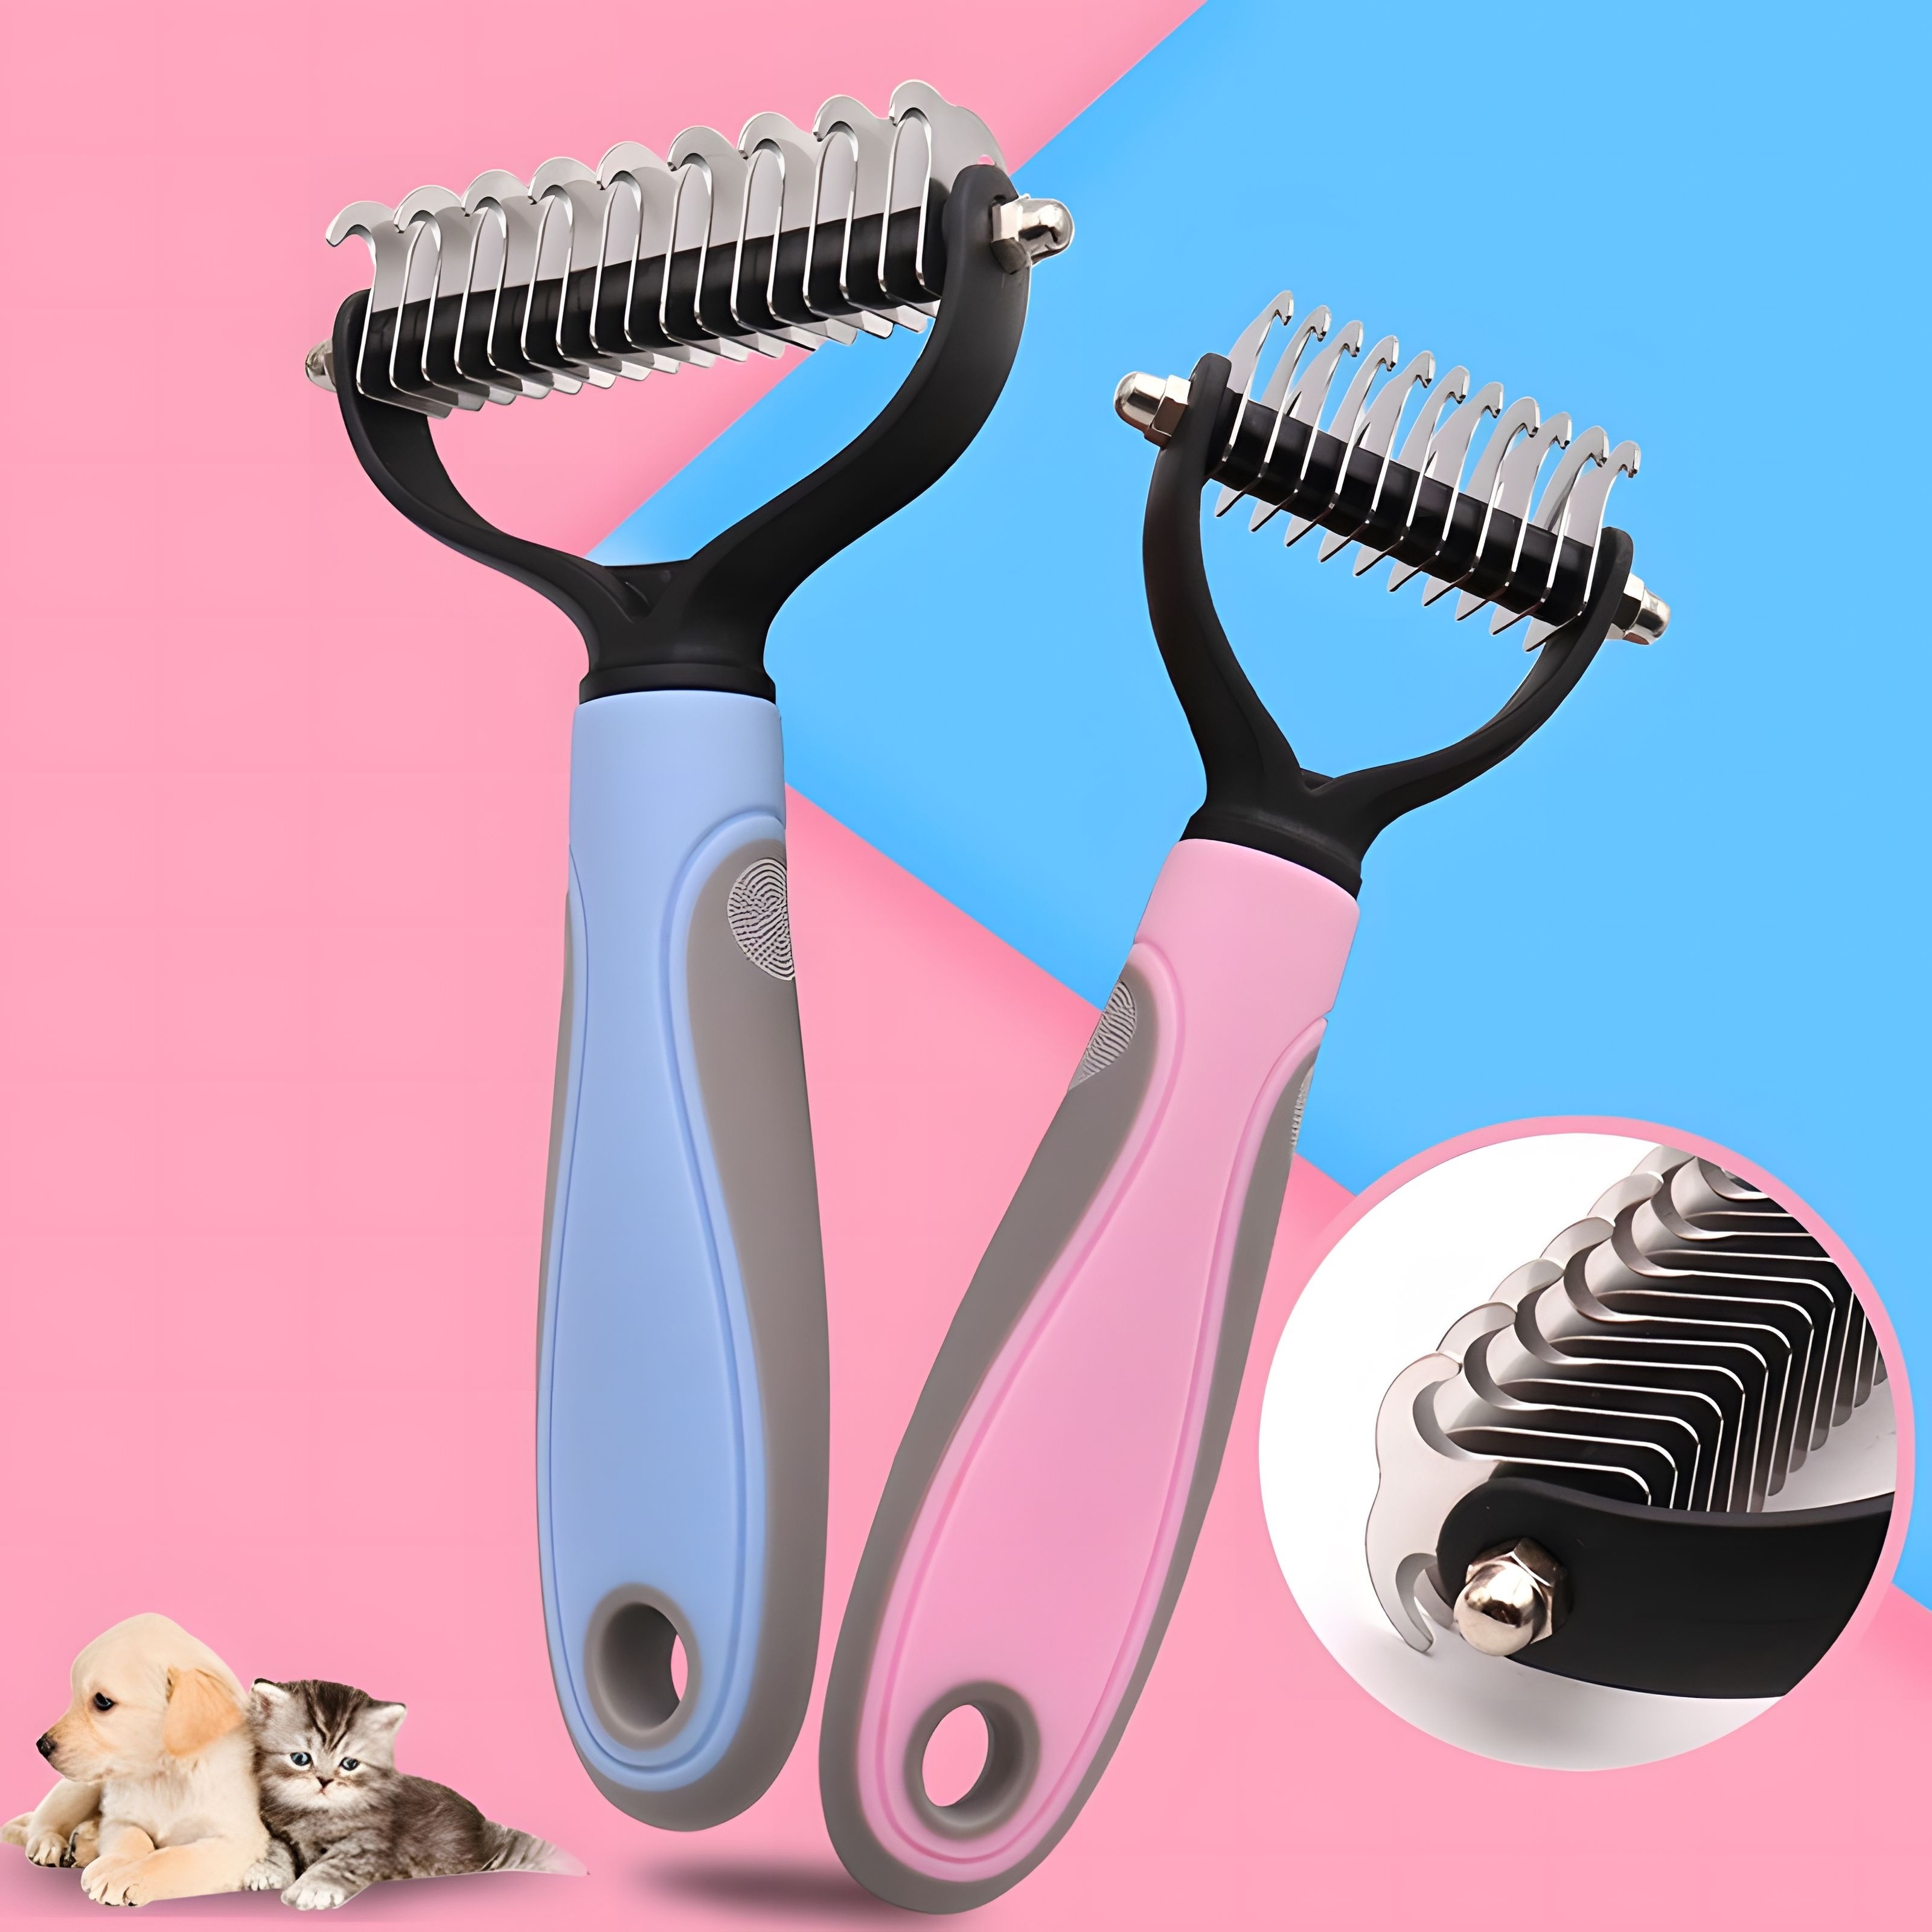 

2-in-1 Pet Grooming Brush For Dogs And Cats - Shedding Tool And Hair Removal Comb With Undercoat Rake For Easy Grooming And A Healthier Coat